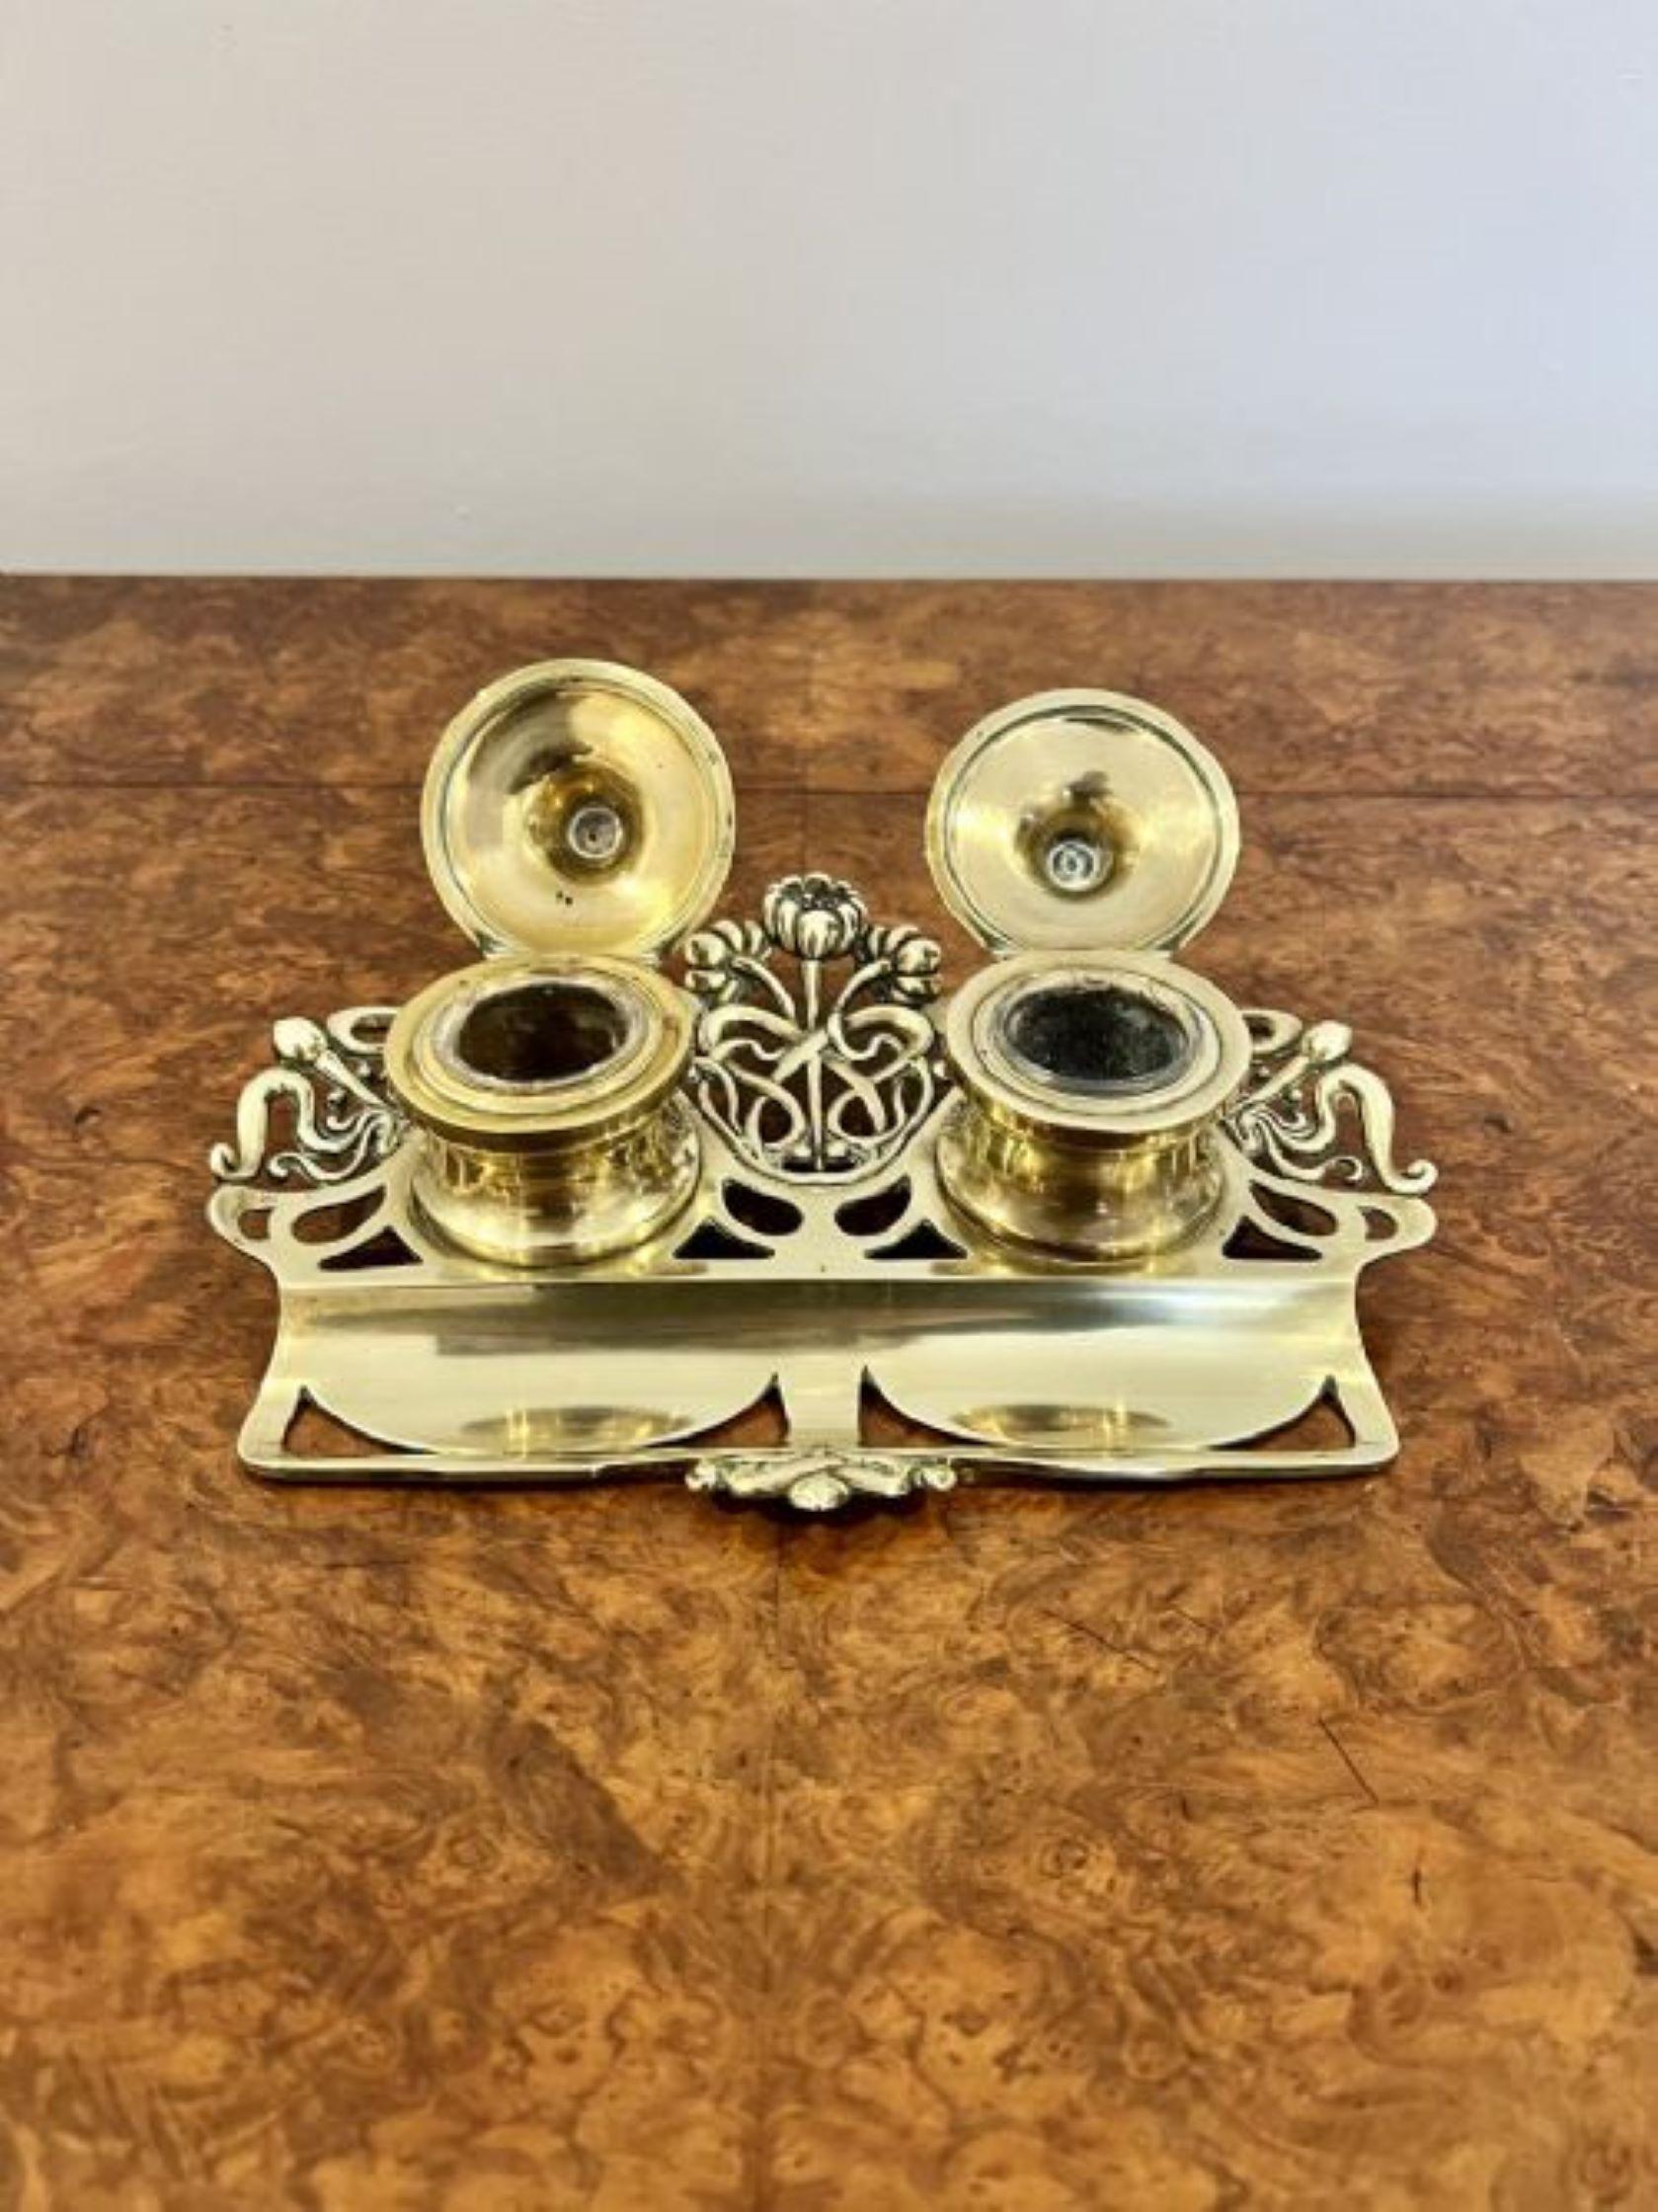 Wonderful antique Victorian ornate brass desk set having a quality ornate brass ink stand with a tray to the front, wonderful ornate detail with two brass ink wells with lift up lids opening to reveal two glass removable ink wells. 
